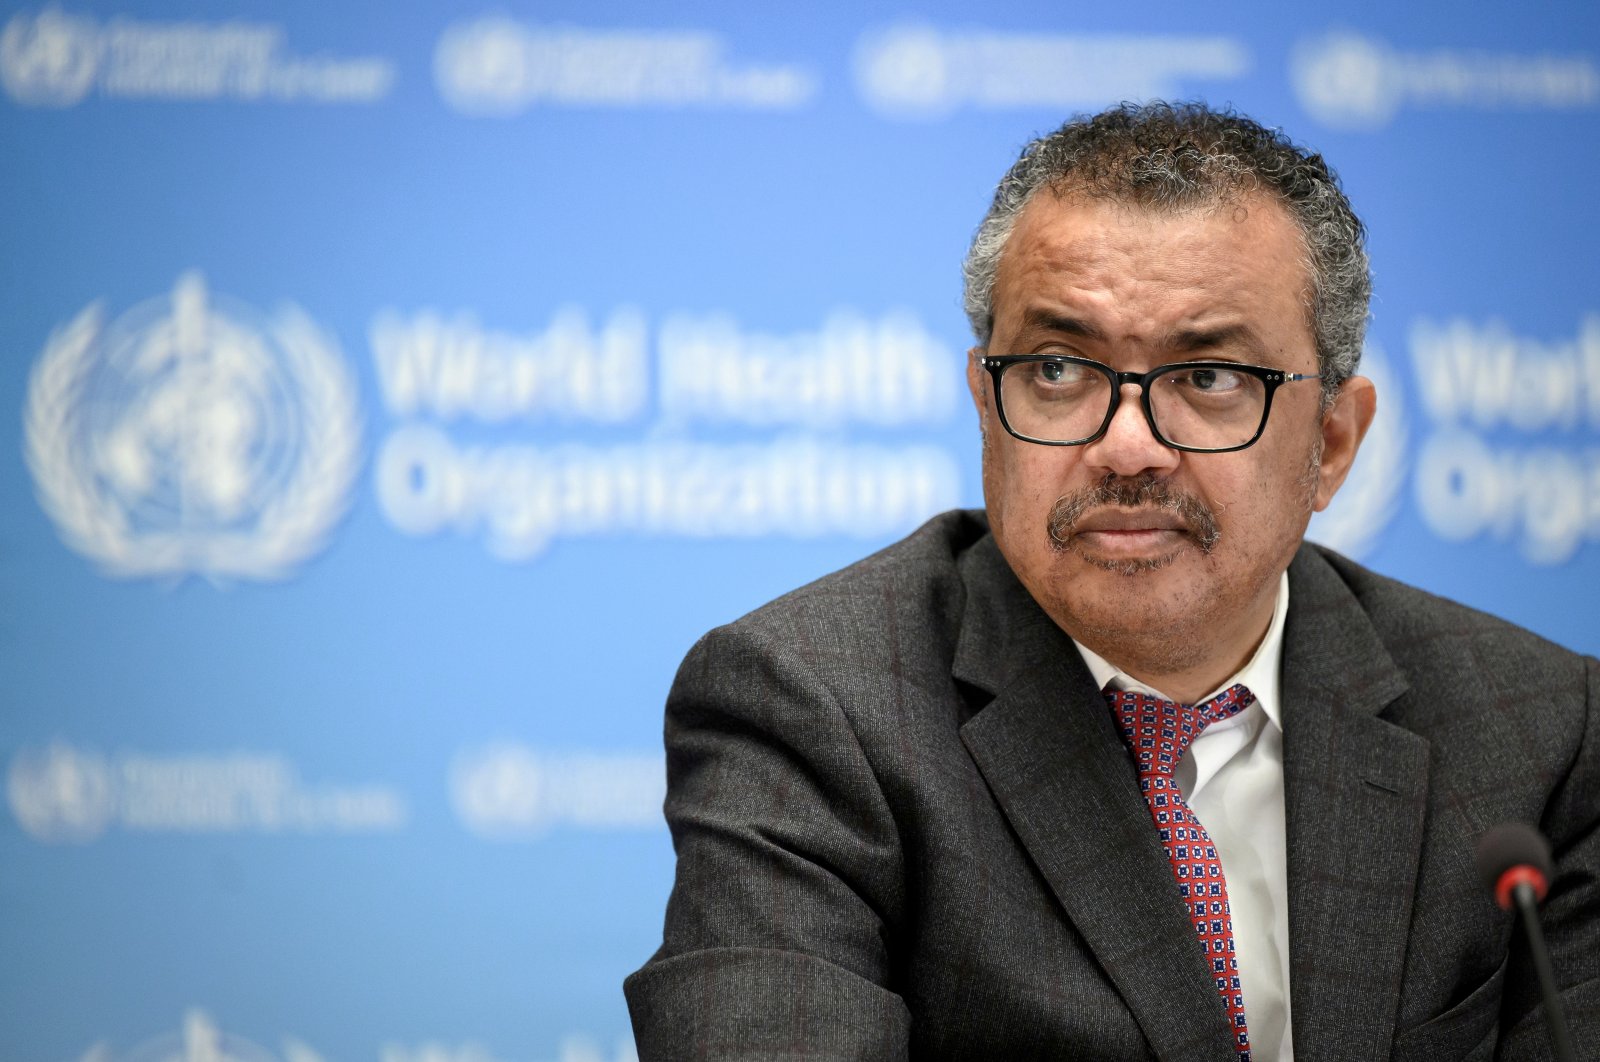 World Health Organization chief Tedros Adhanom Ghebreyesus attends a ceremony to launch a multiyear partnership with Qatar on making FIFA Football World Cup 2022 and mega sporting events healthy and safe at the WHO headquarters, in Geneva, Switzerland, Oct. 18, 2021. (Reuters Photo)